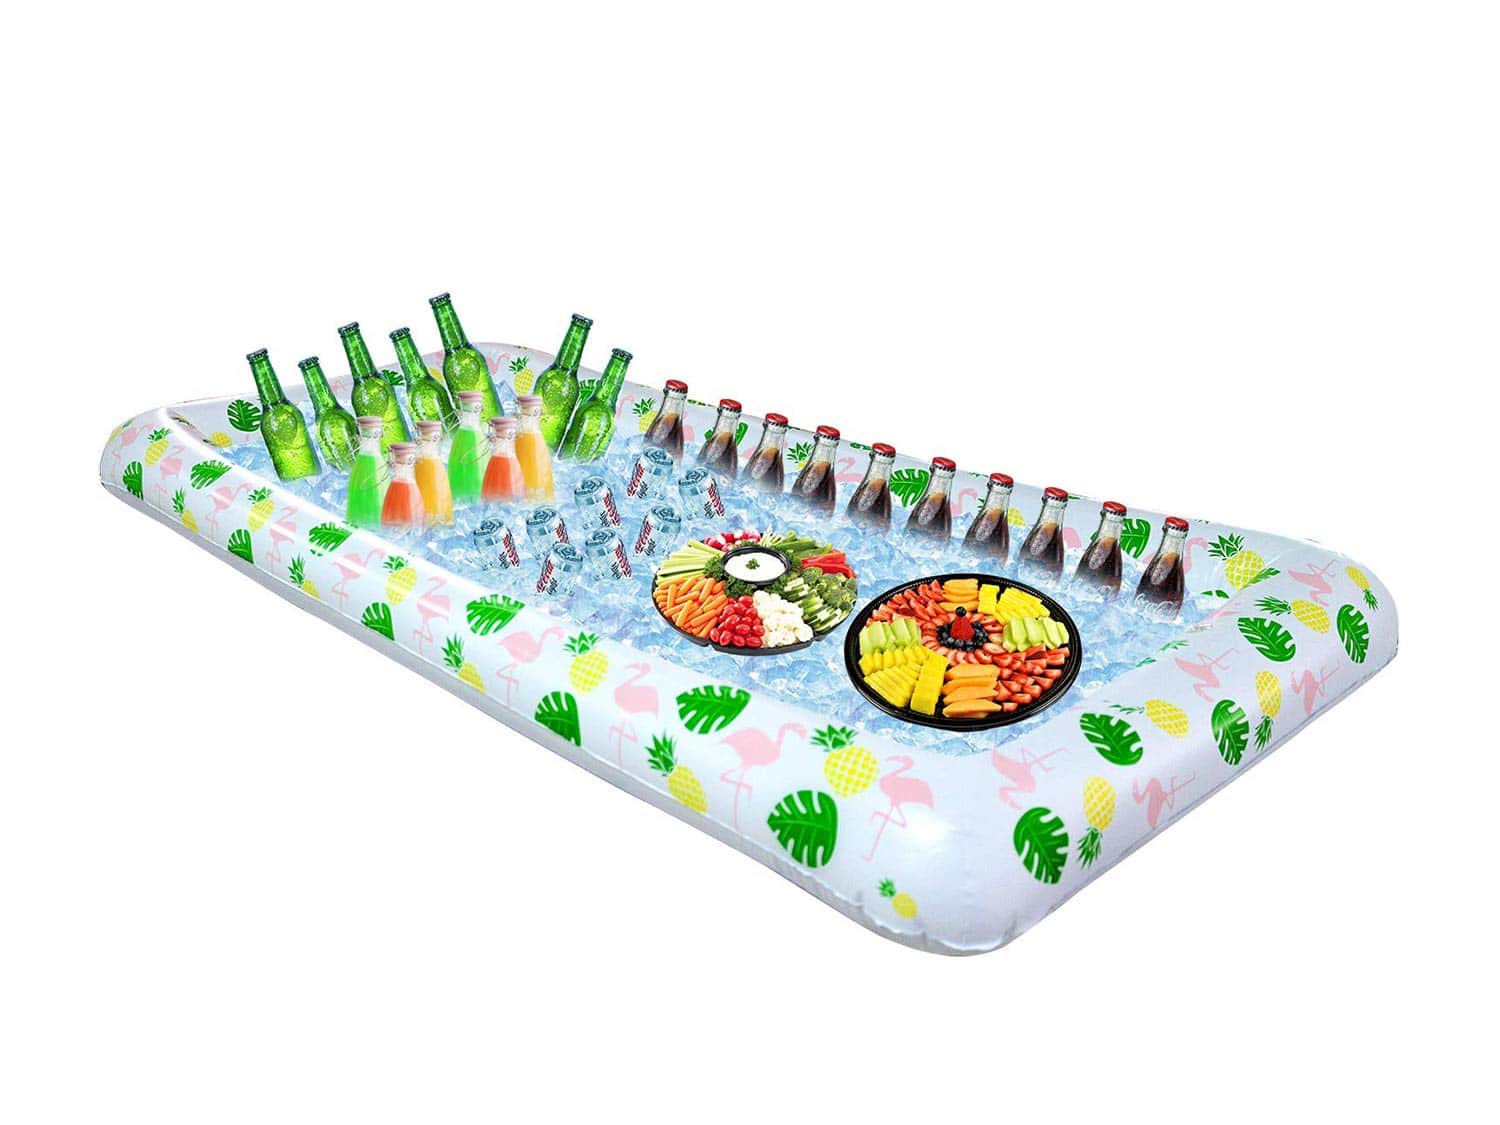 Tifeson Luau Inflatable Serving Bar with Drain Plug－Aloha Tropical Style Inflatable Cooler Ice Buffet Salad Serving Trays Food Drink Holder Containers for Outdoor BBQ, Graduation Party, Beach Party